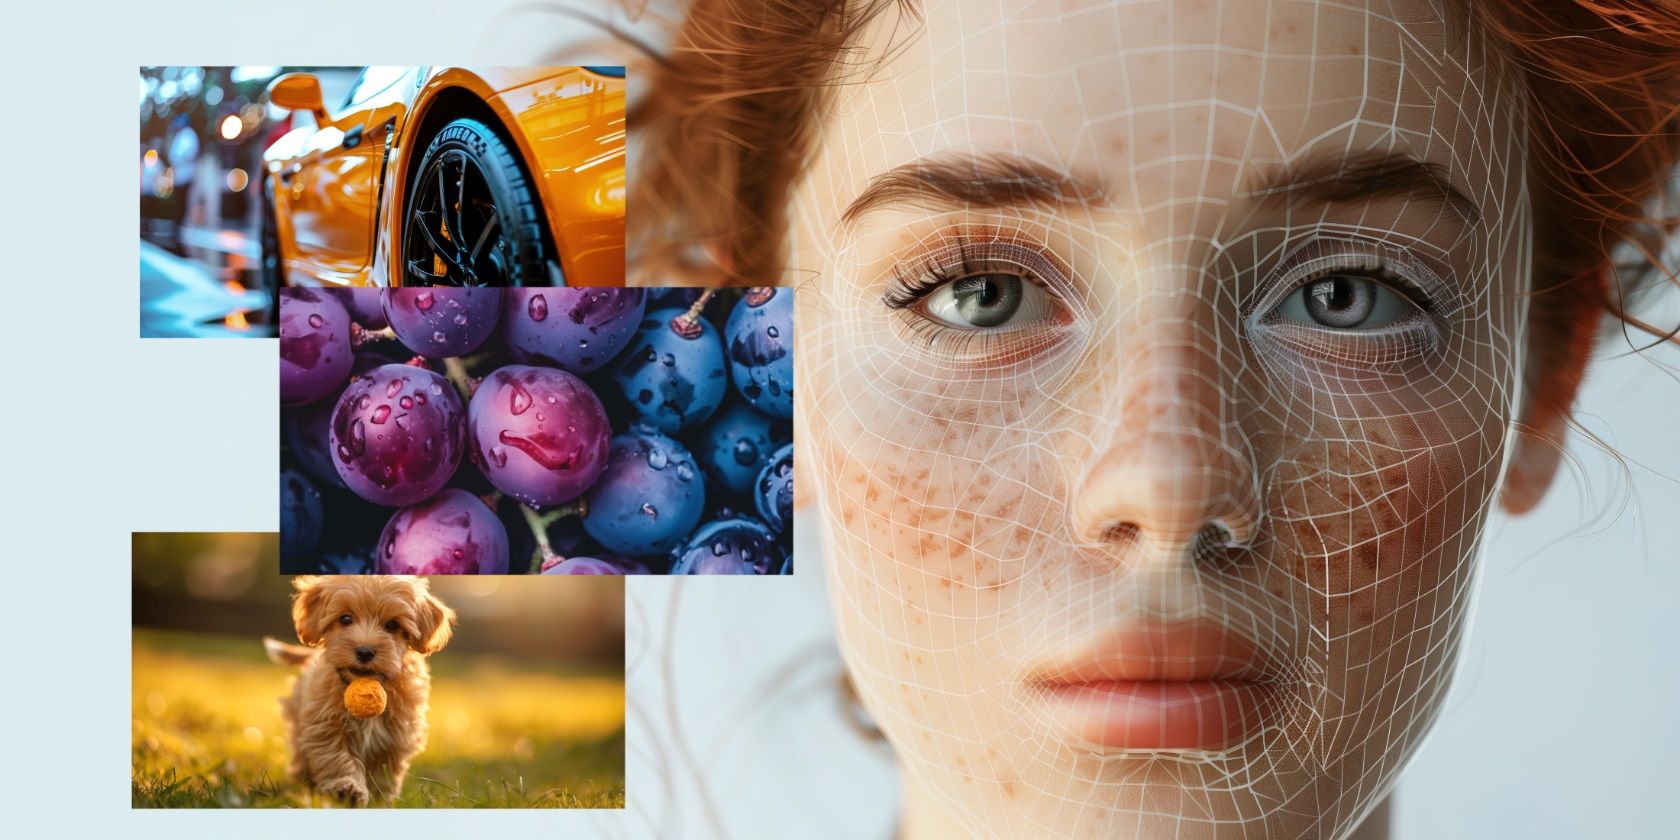 A woman's face overlaid with a mesh grid, suggesting digital facial recognition, alongside separate images of grapes, a dog, and a car wheel.